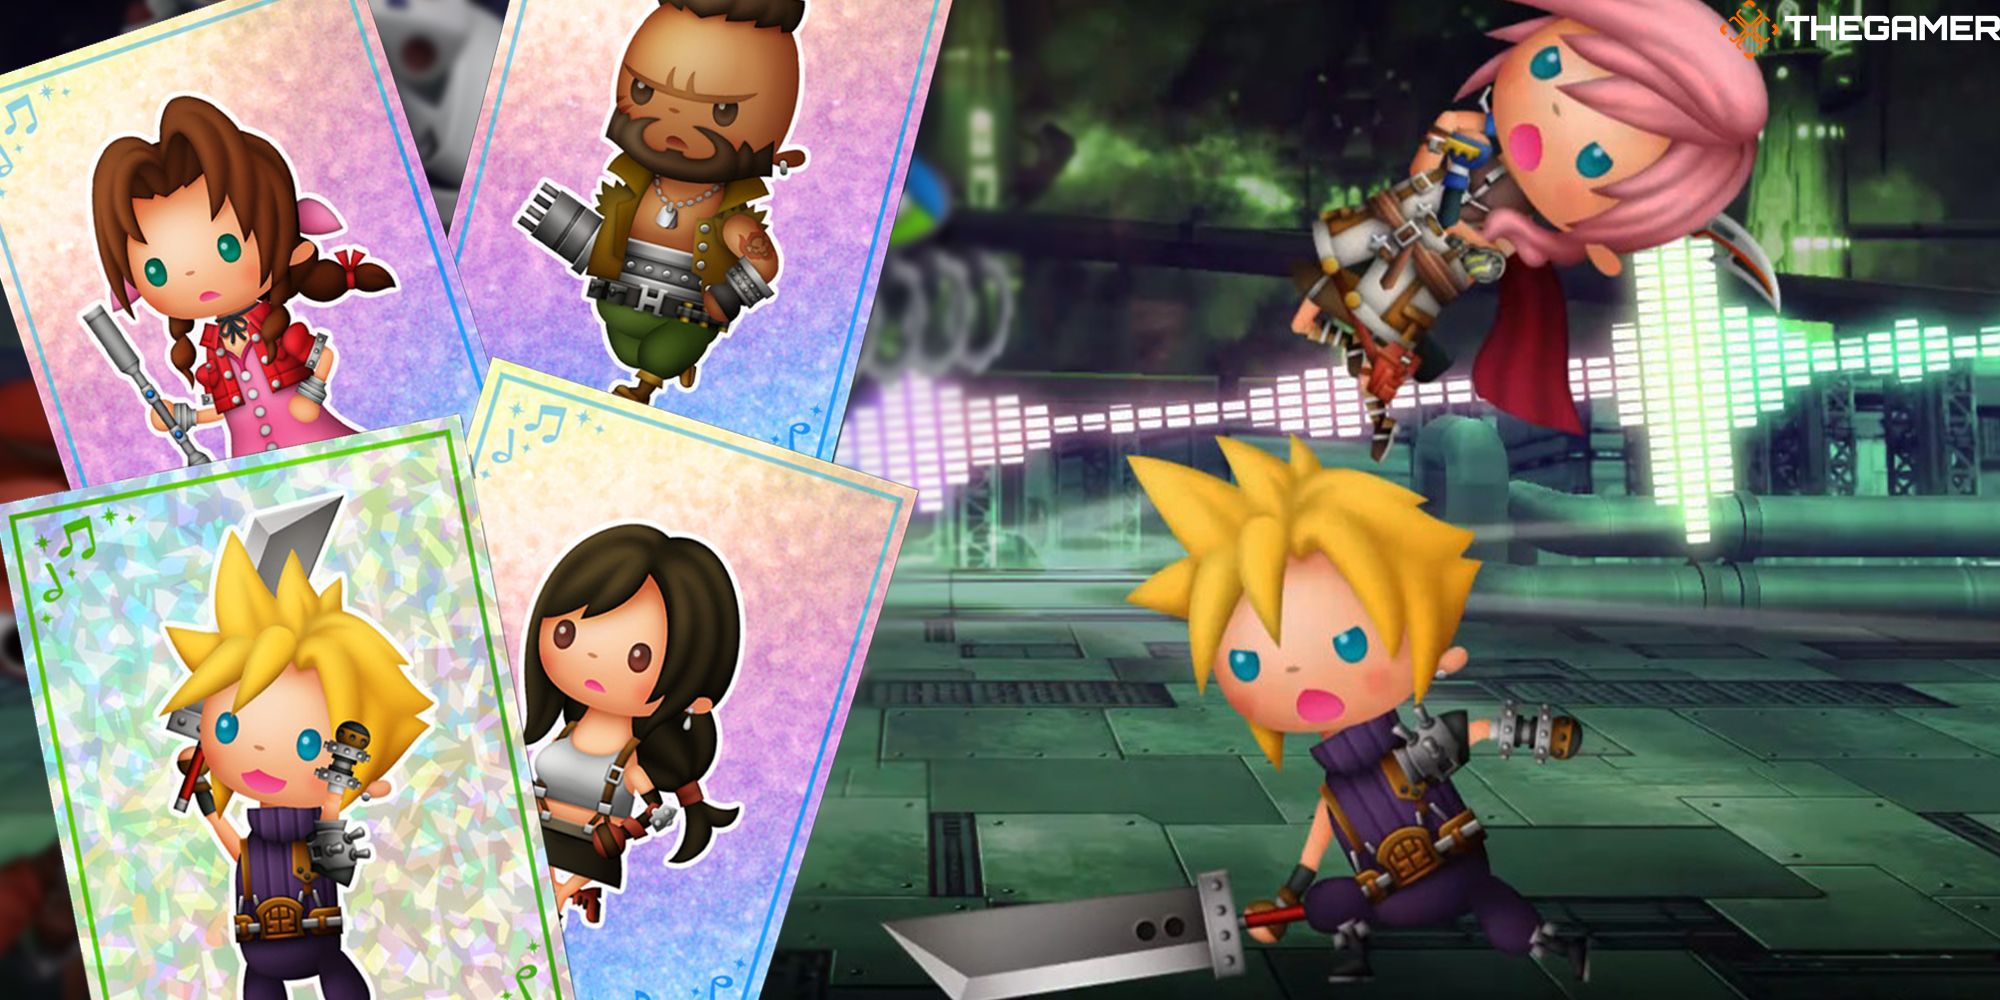 Four Final Fantasy 7 character CollectaCards sit in front of a musical battle scene featuring Cloud and Lightning from Theatrhythm: Final Bar Line.